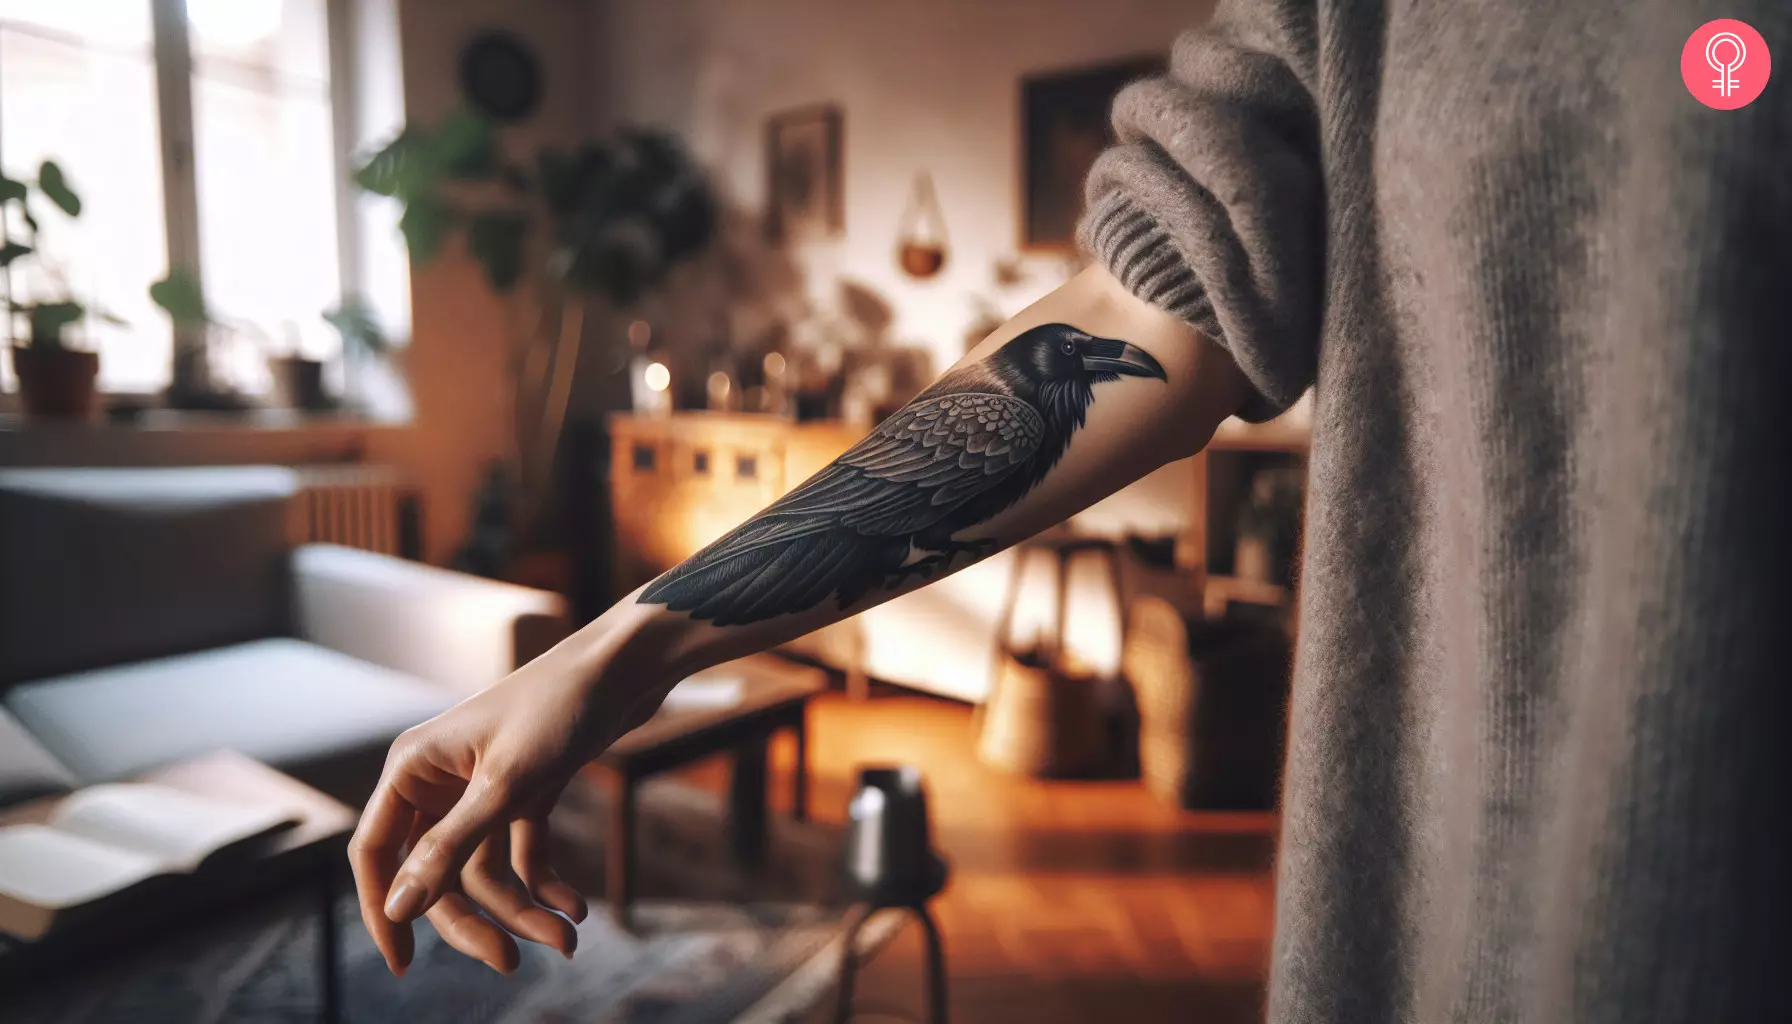 A raven tattoo design on the forearm of a woman